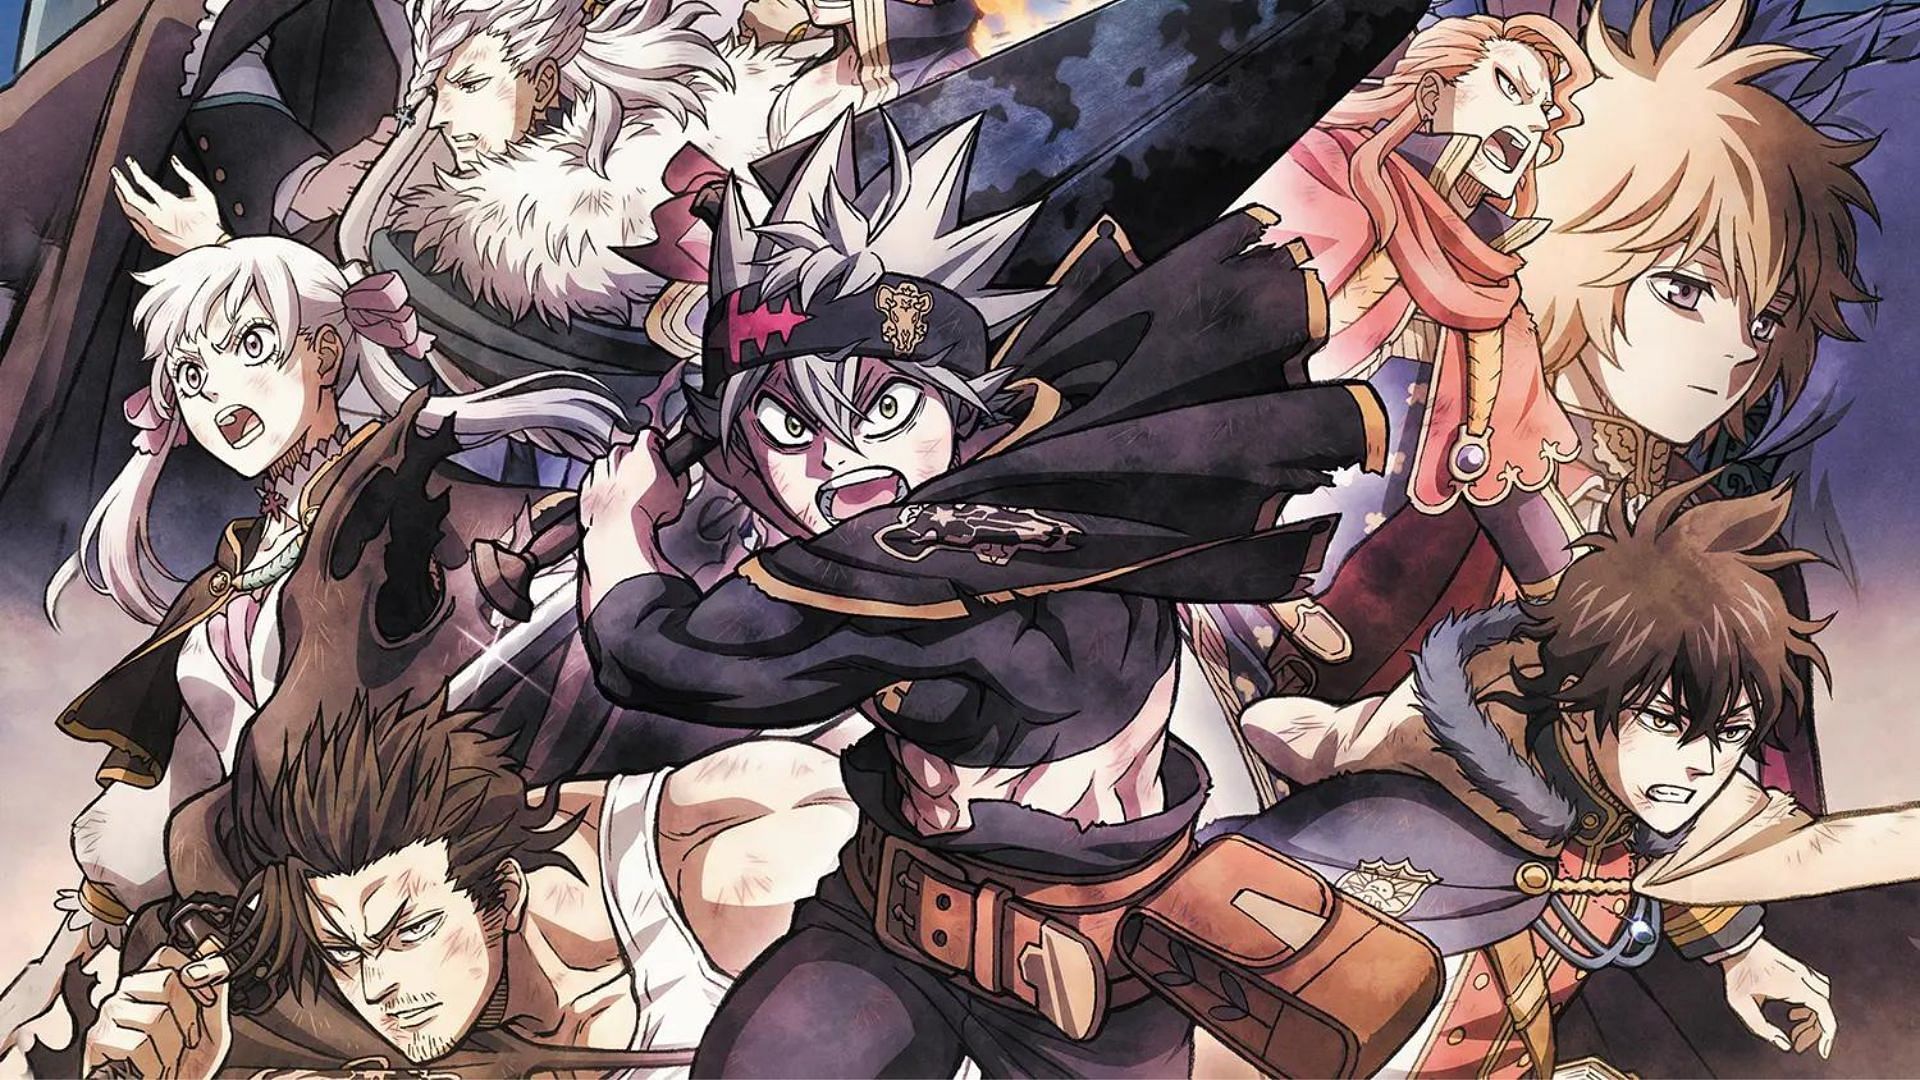 Studio Pierrot Wants 'Black Clover' To Be The New 'Naruto' | Black clover  anime, Anime, Black clover manga